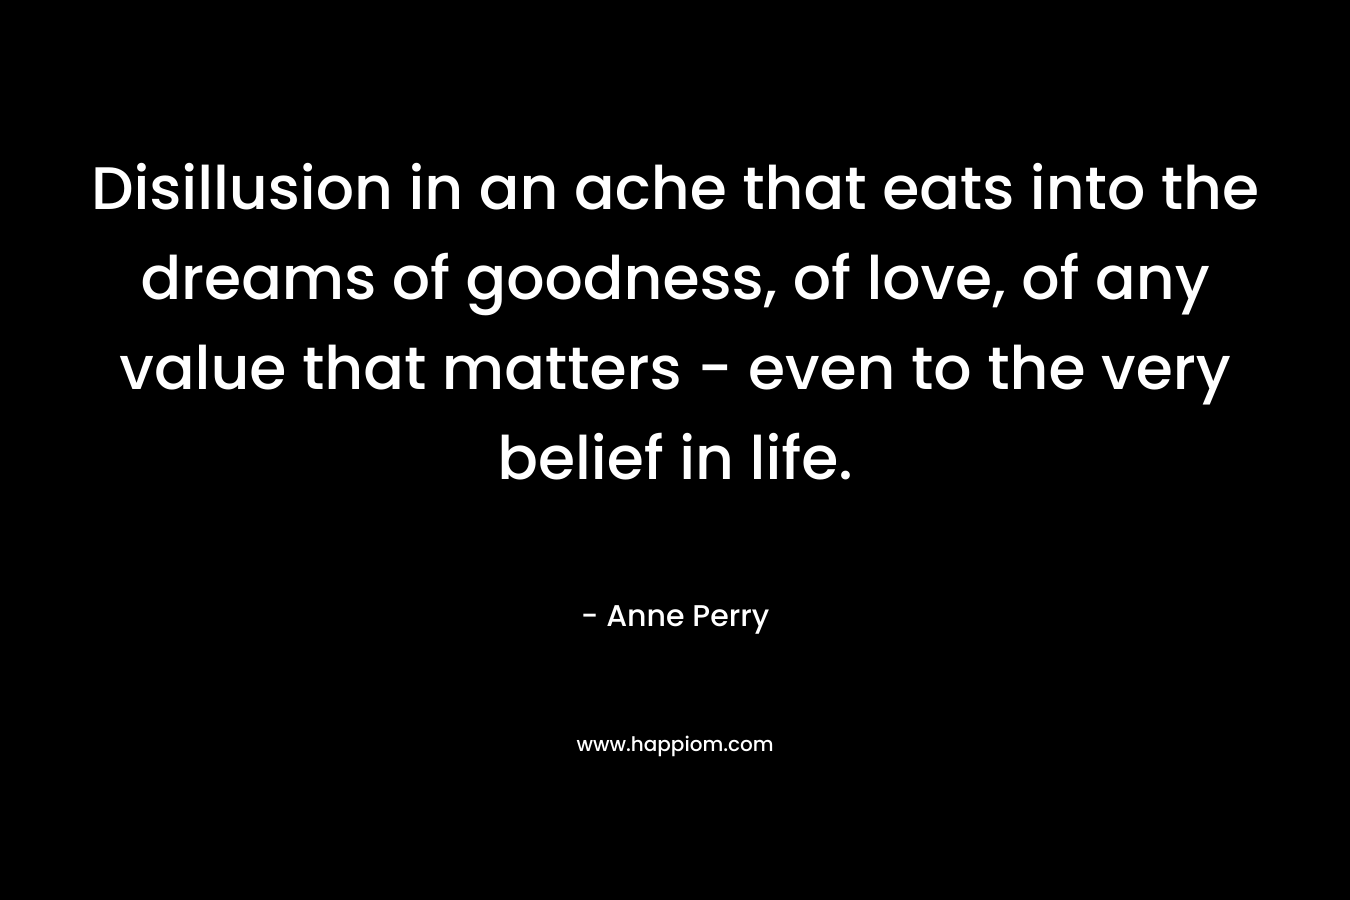 Disillusion in an ache that eats into the dreams of goodness, of love, of any value that matters – even to the very belief in life. – Anne Perry